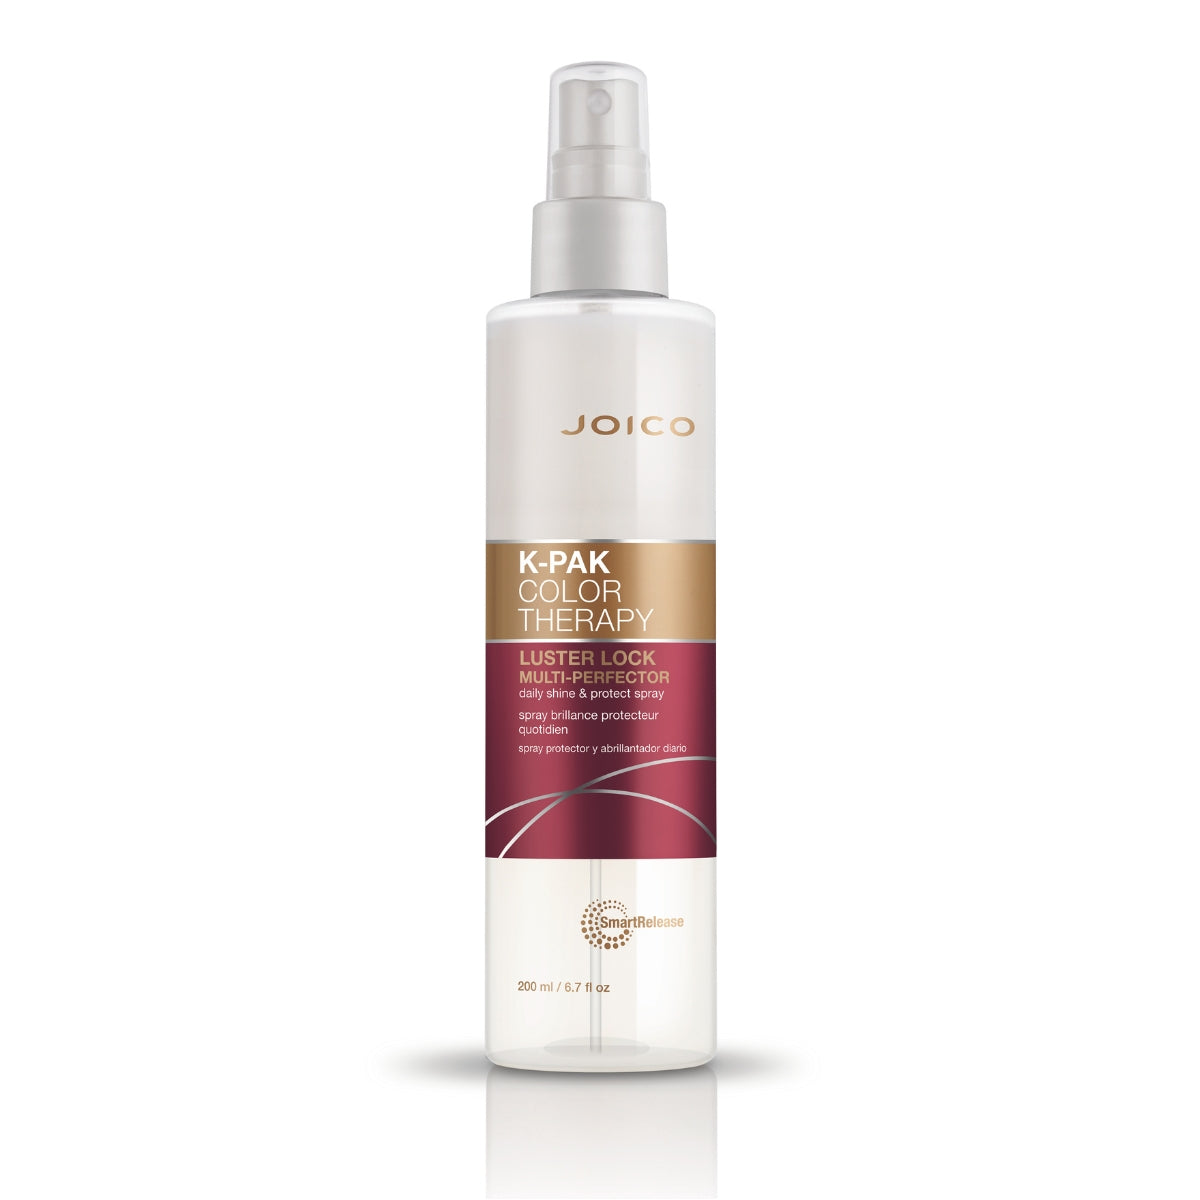 Joico K-Pak Color Therapy Lustre Lock Daily Shine & Protect Spray